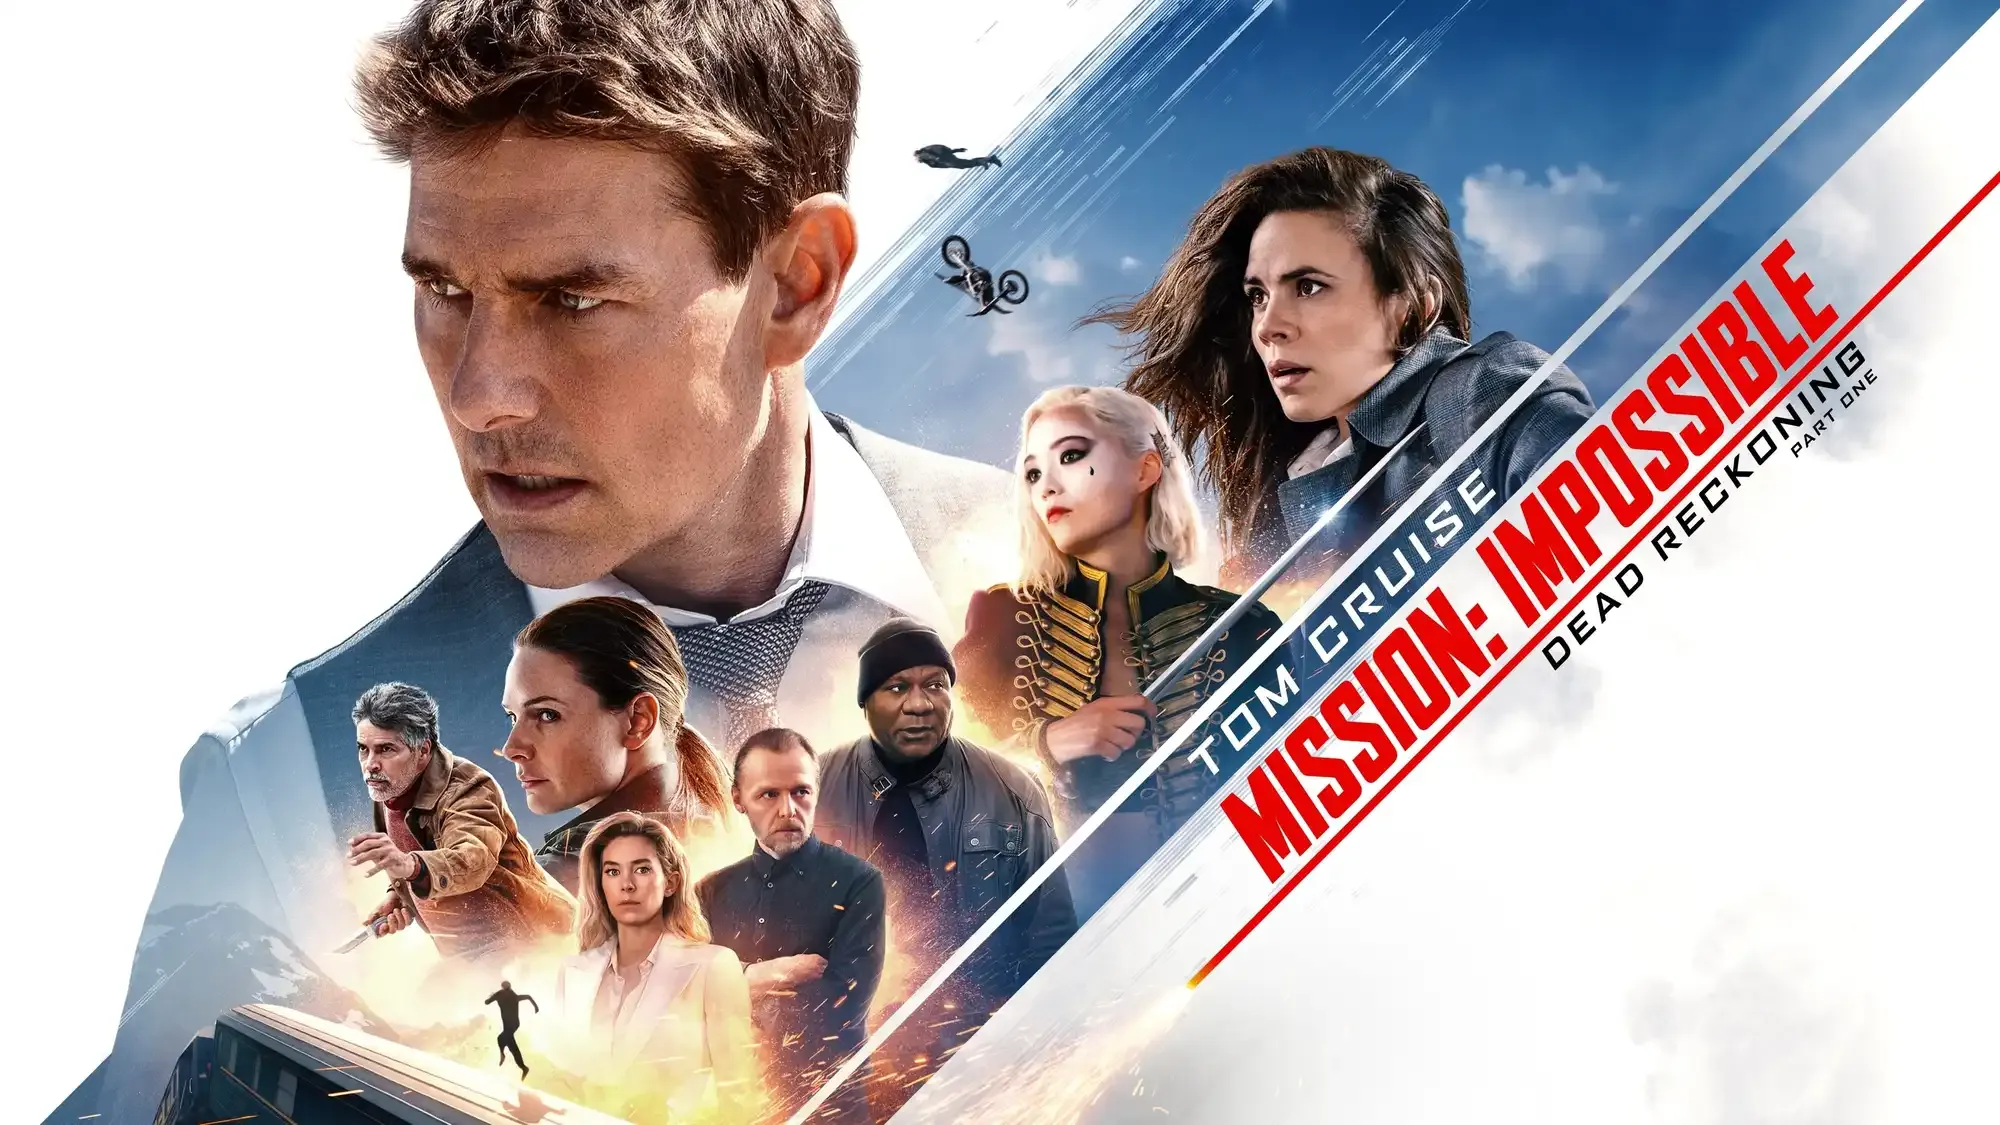 Mission: Impossible - Dead Reckoning Part One movie review